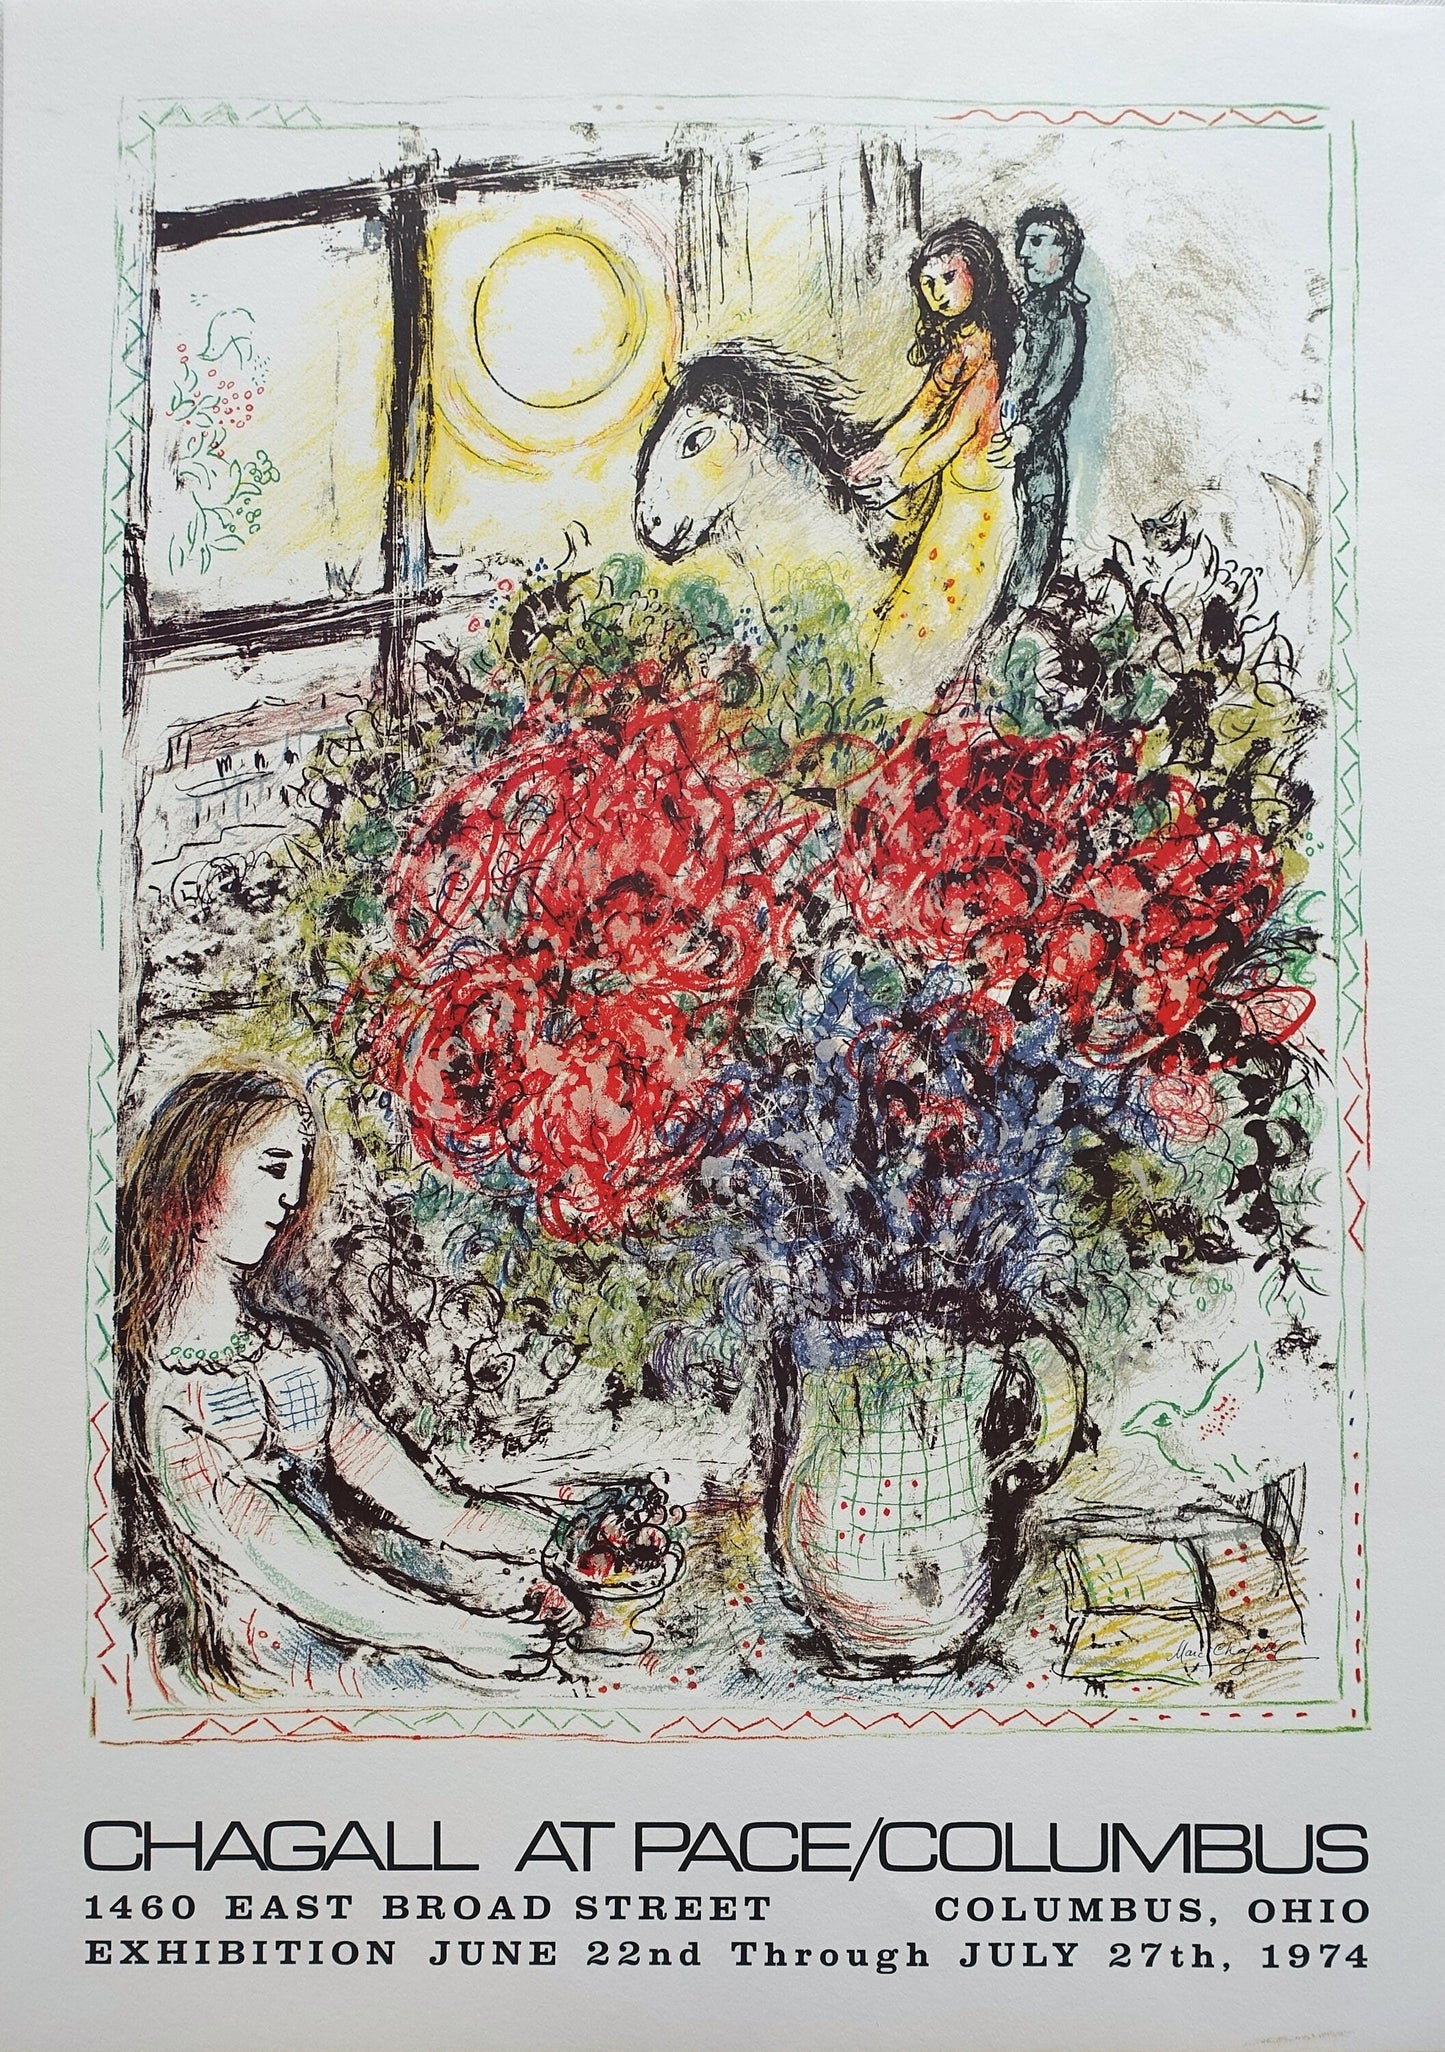 1974 Chagall at Pace Colombus Exhibition Poster - Original Vintage Poster